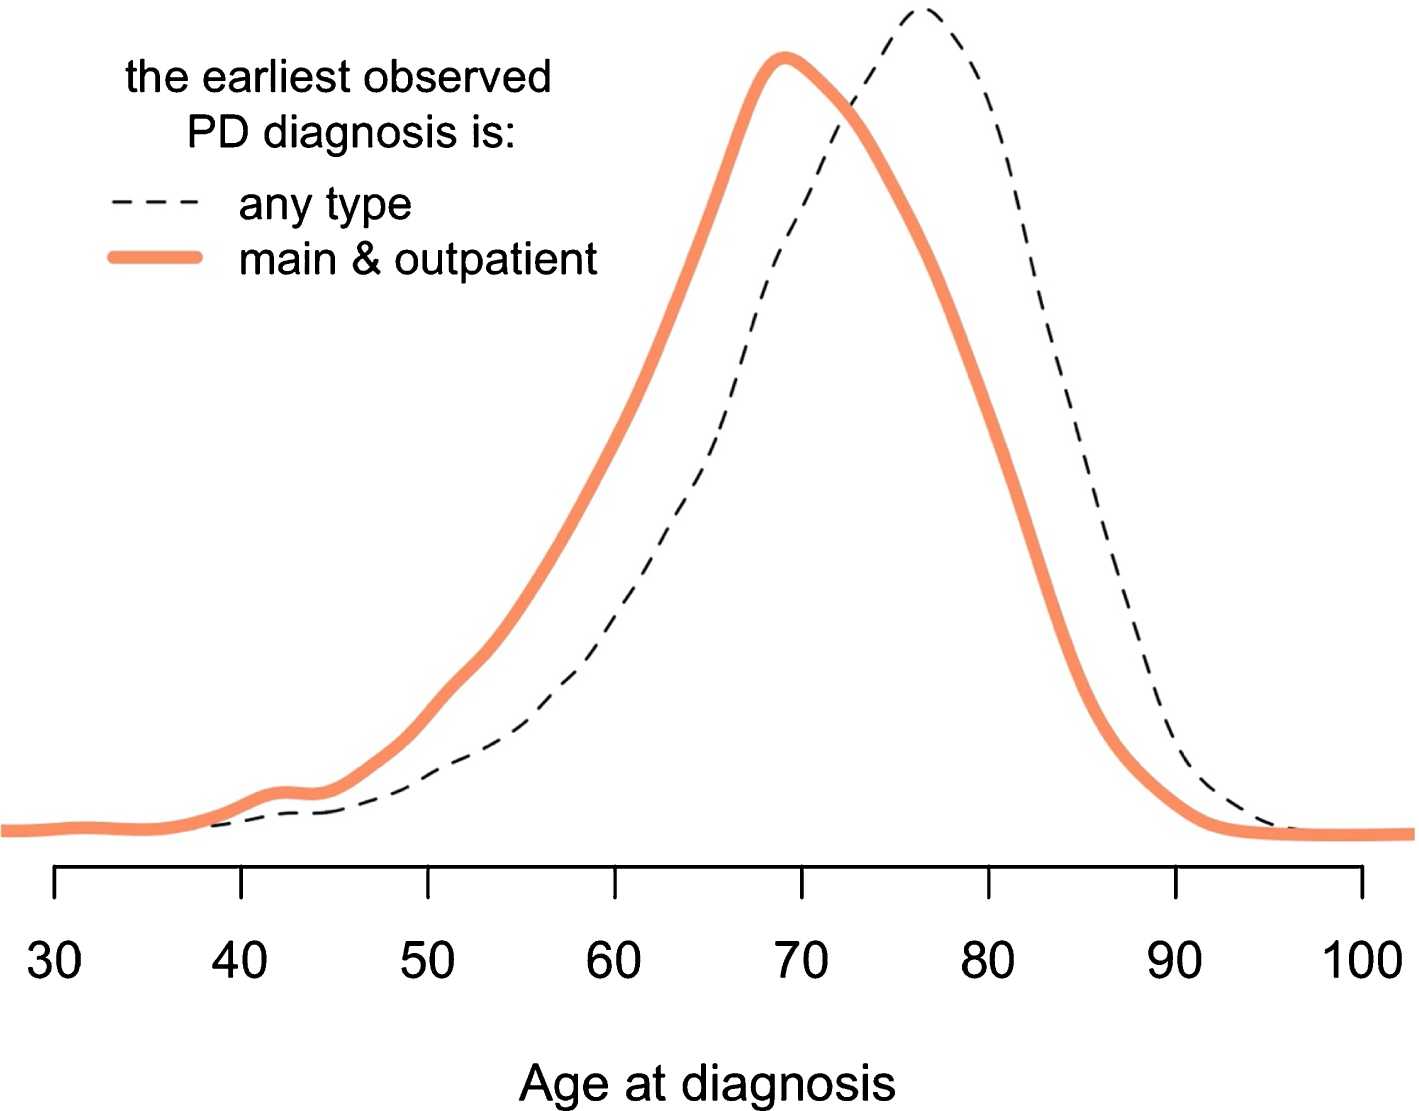 Conservative method to accurately identify first PD diagnosis. A more conservative method results in younger age at the first diagnosis. The “main” means that diagnosis was assigned as the primary reason for that particular healthcare facility visit (there can be only one main diagnosis and multiple secondary diagnoses during one visit). The “any type” means that the earliest observed PD diagnosis might come from inpatient or outpatient registers, also it can be assigned as the main or the secondary diagnosis. A more detailed version of this figure is provided in Supplementary Fig. 5.